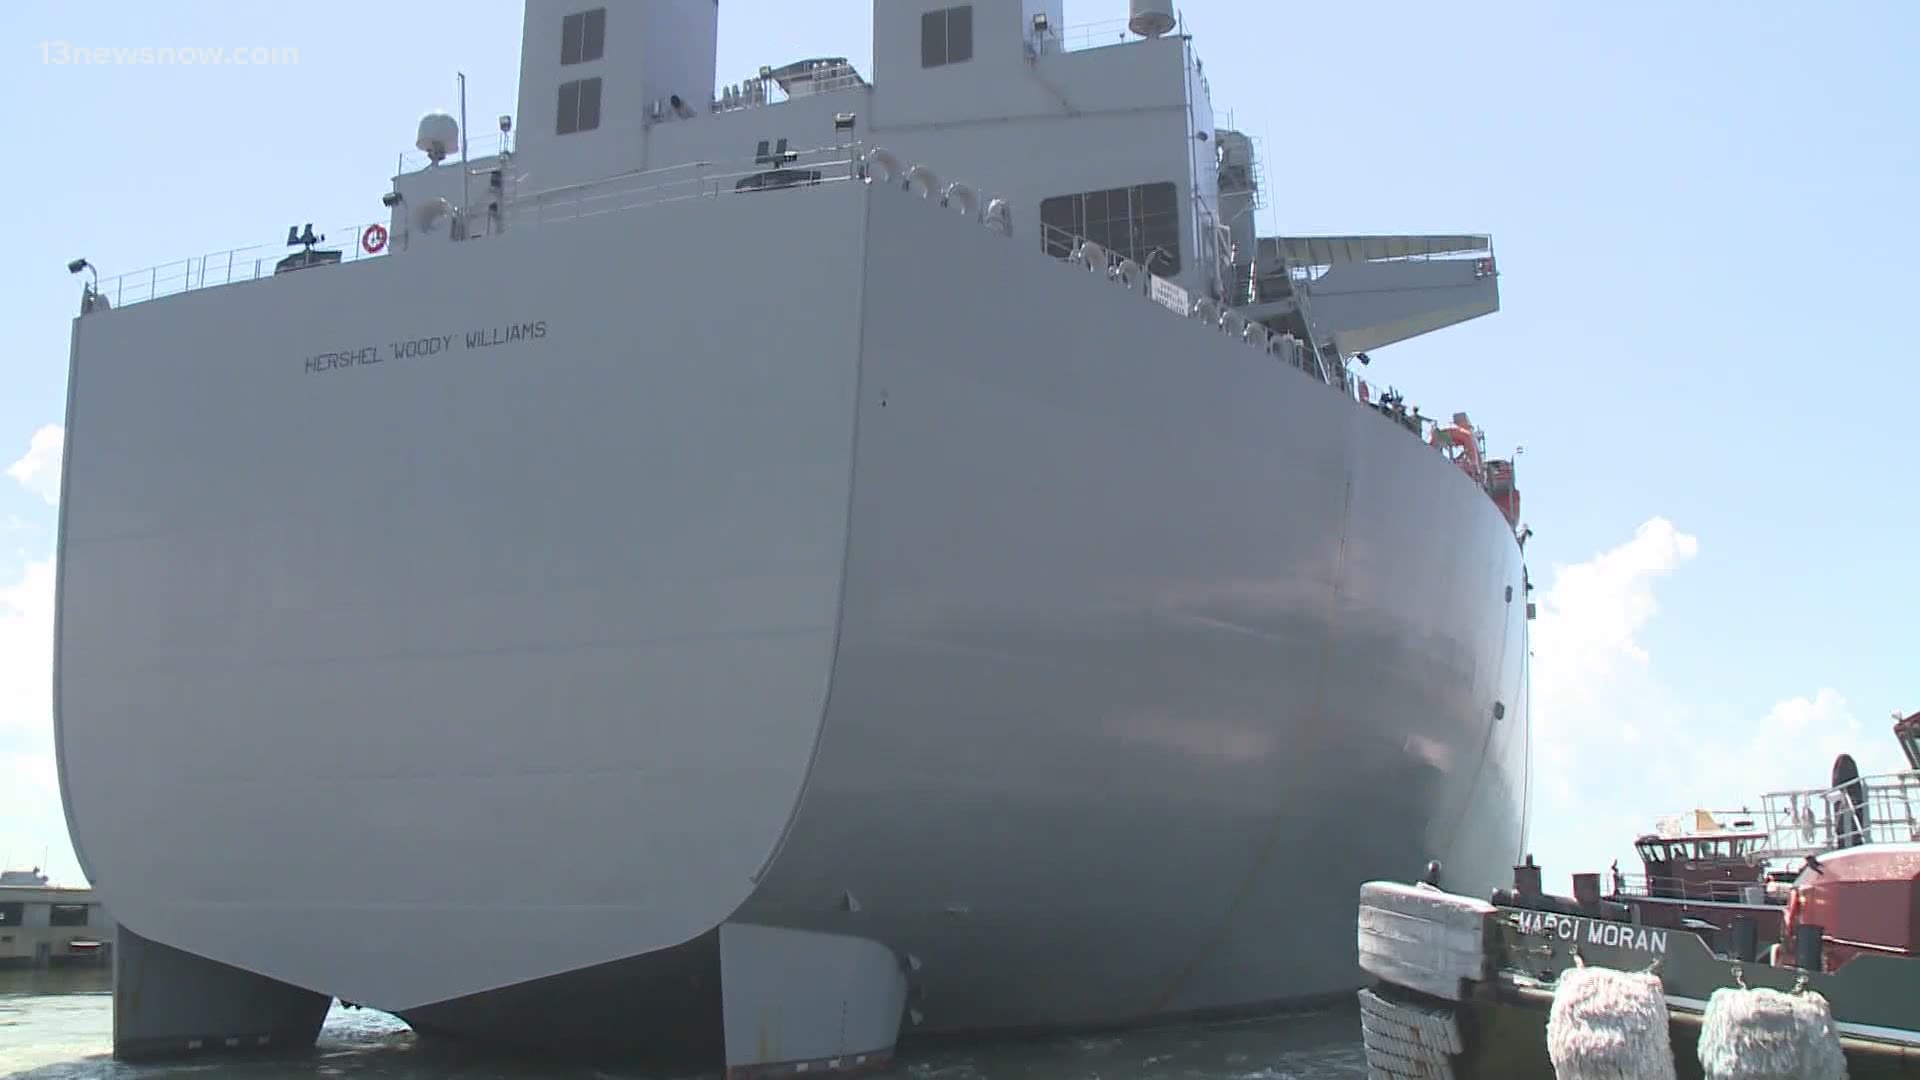 The ship was commissioned back in March, after an earlier life as a Military Sealift Command vessel.